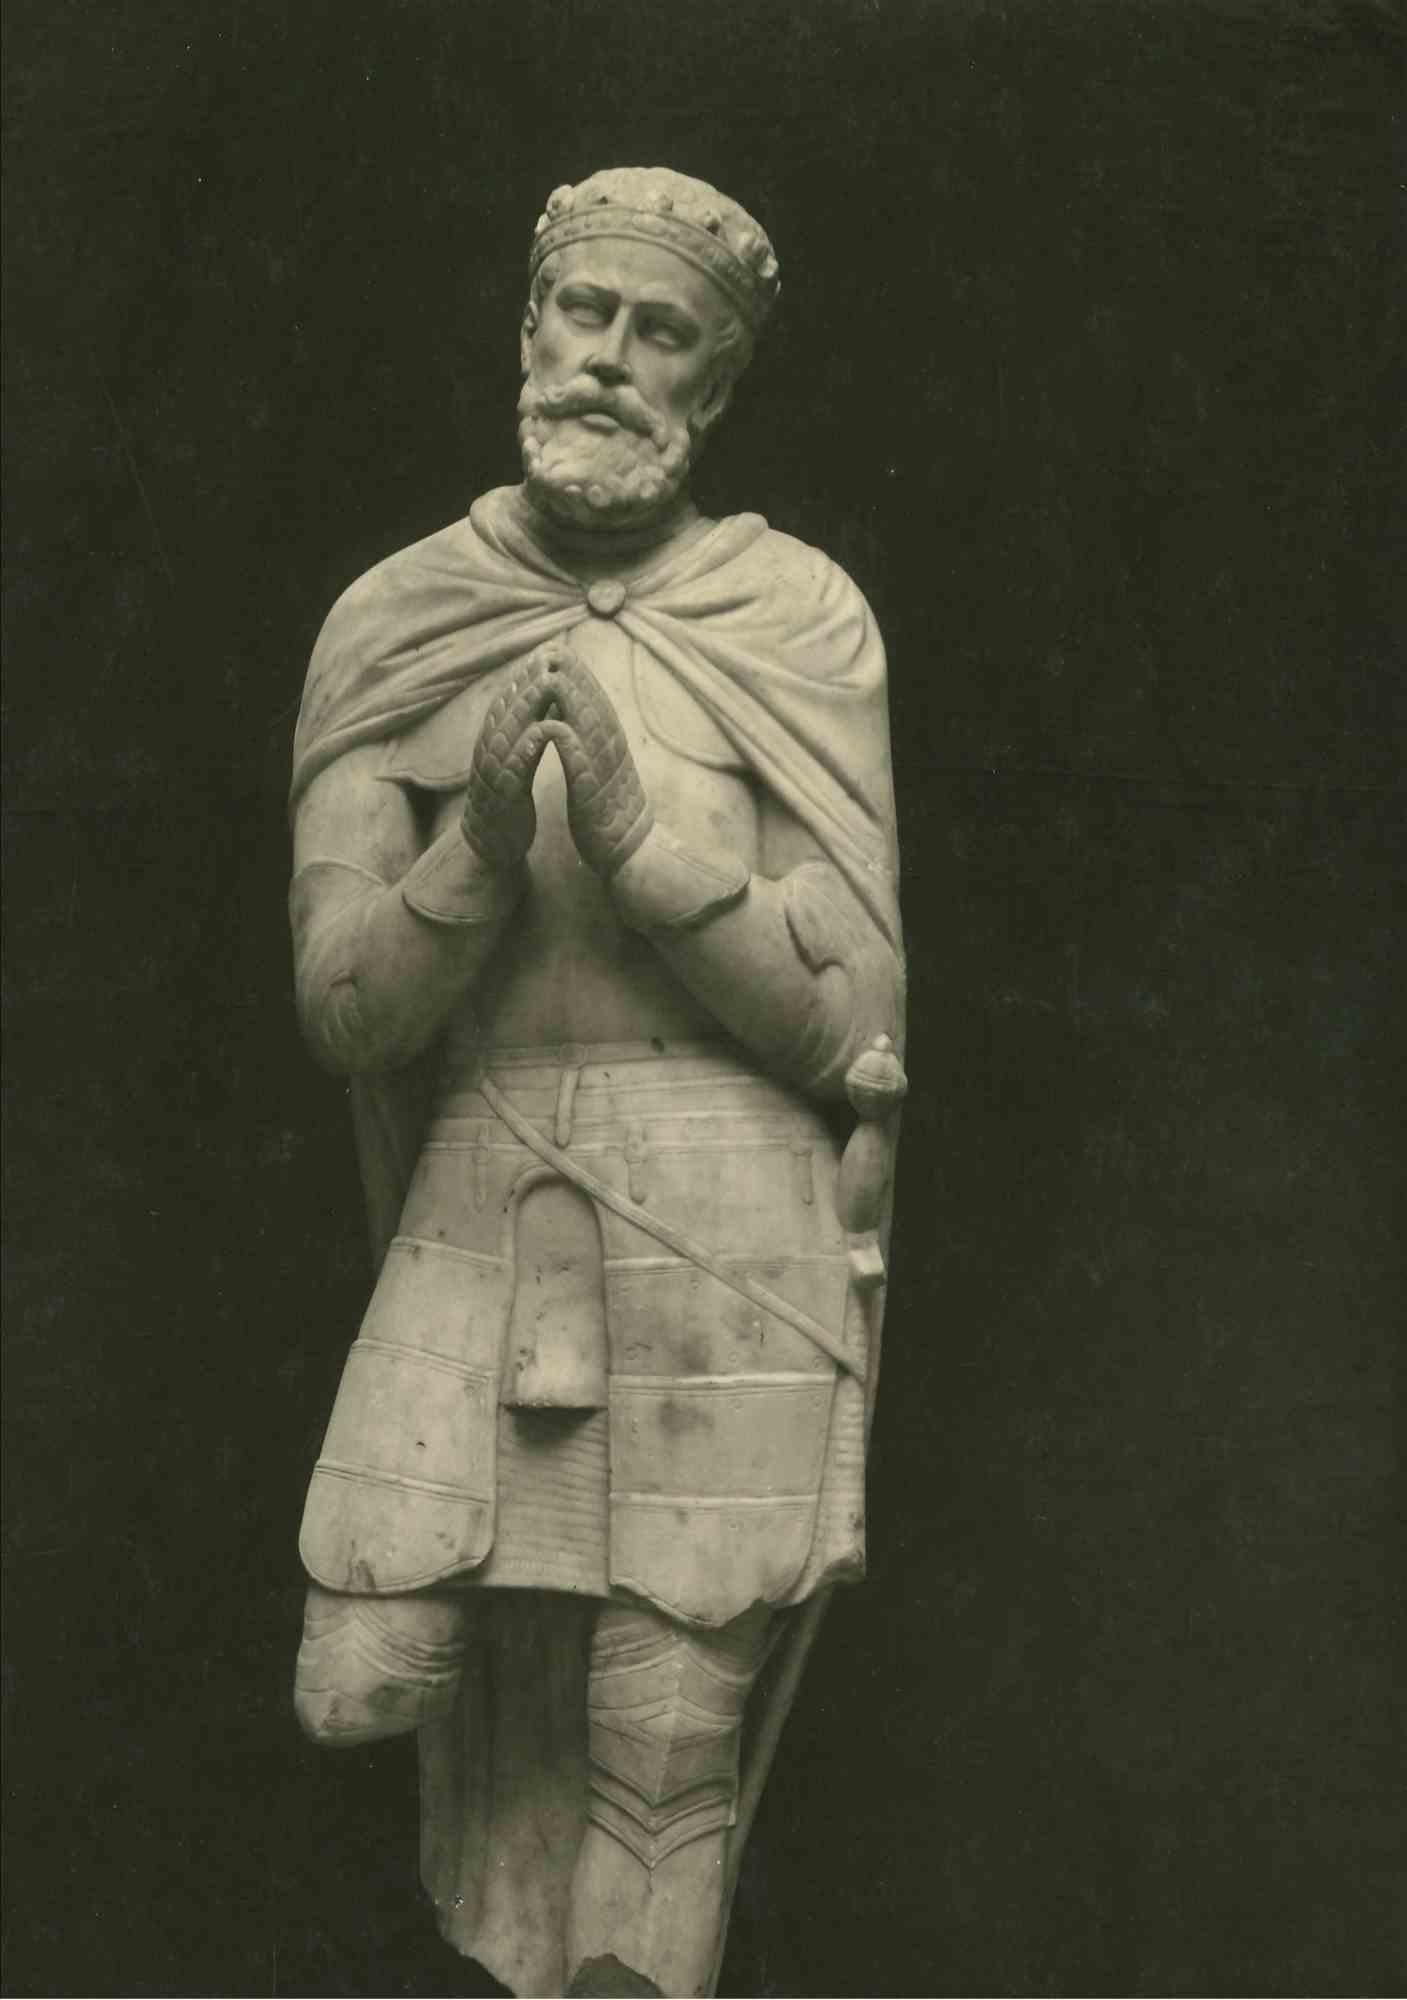 Unknown Figurative Photograph - Vintage Photo of a Statue by Girolamo Santacroce - Early 20th Century